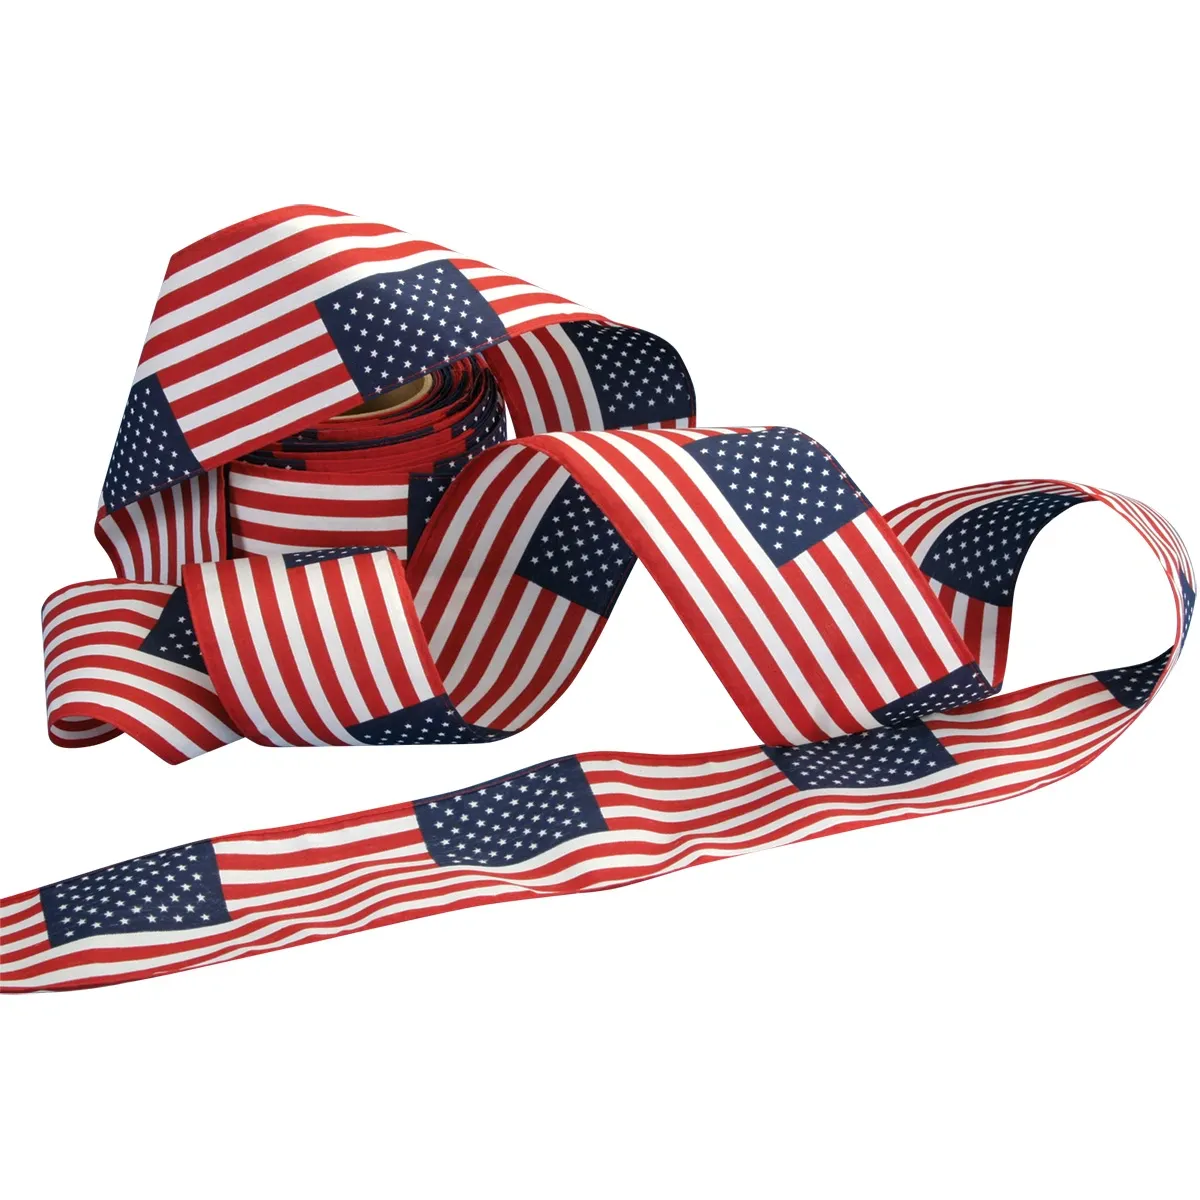 US Flag Pattern Bunting/Garland, Cotton, hemmed on all 4 sides